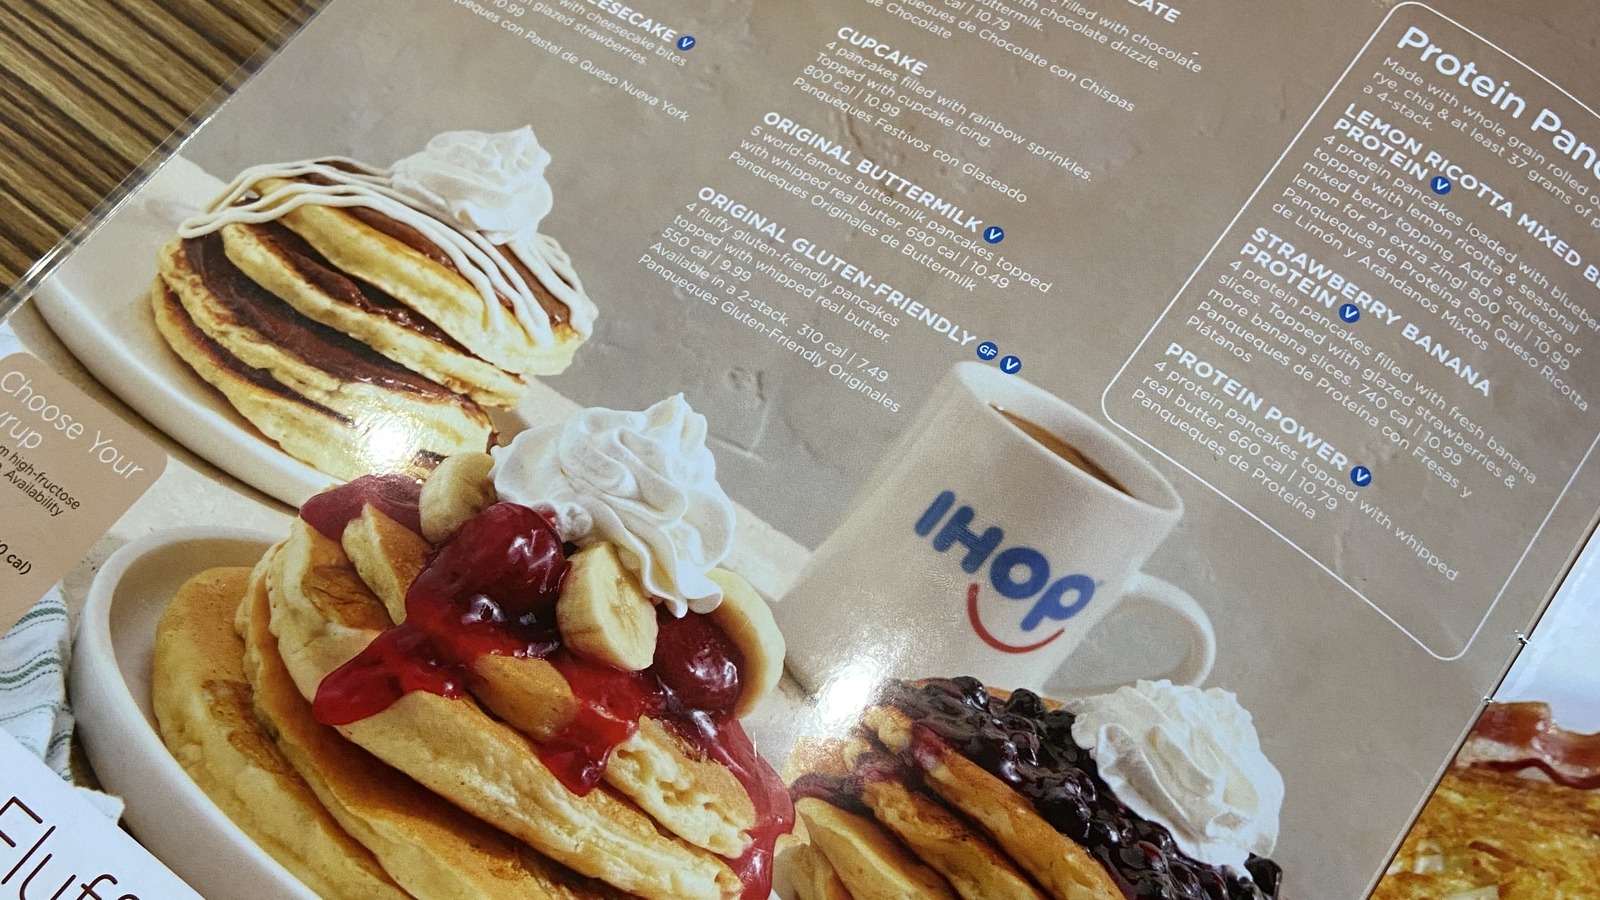 IHOP offers cheescake-filled pancakes